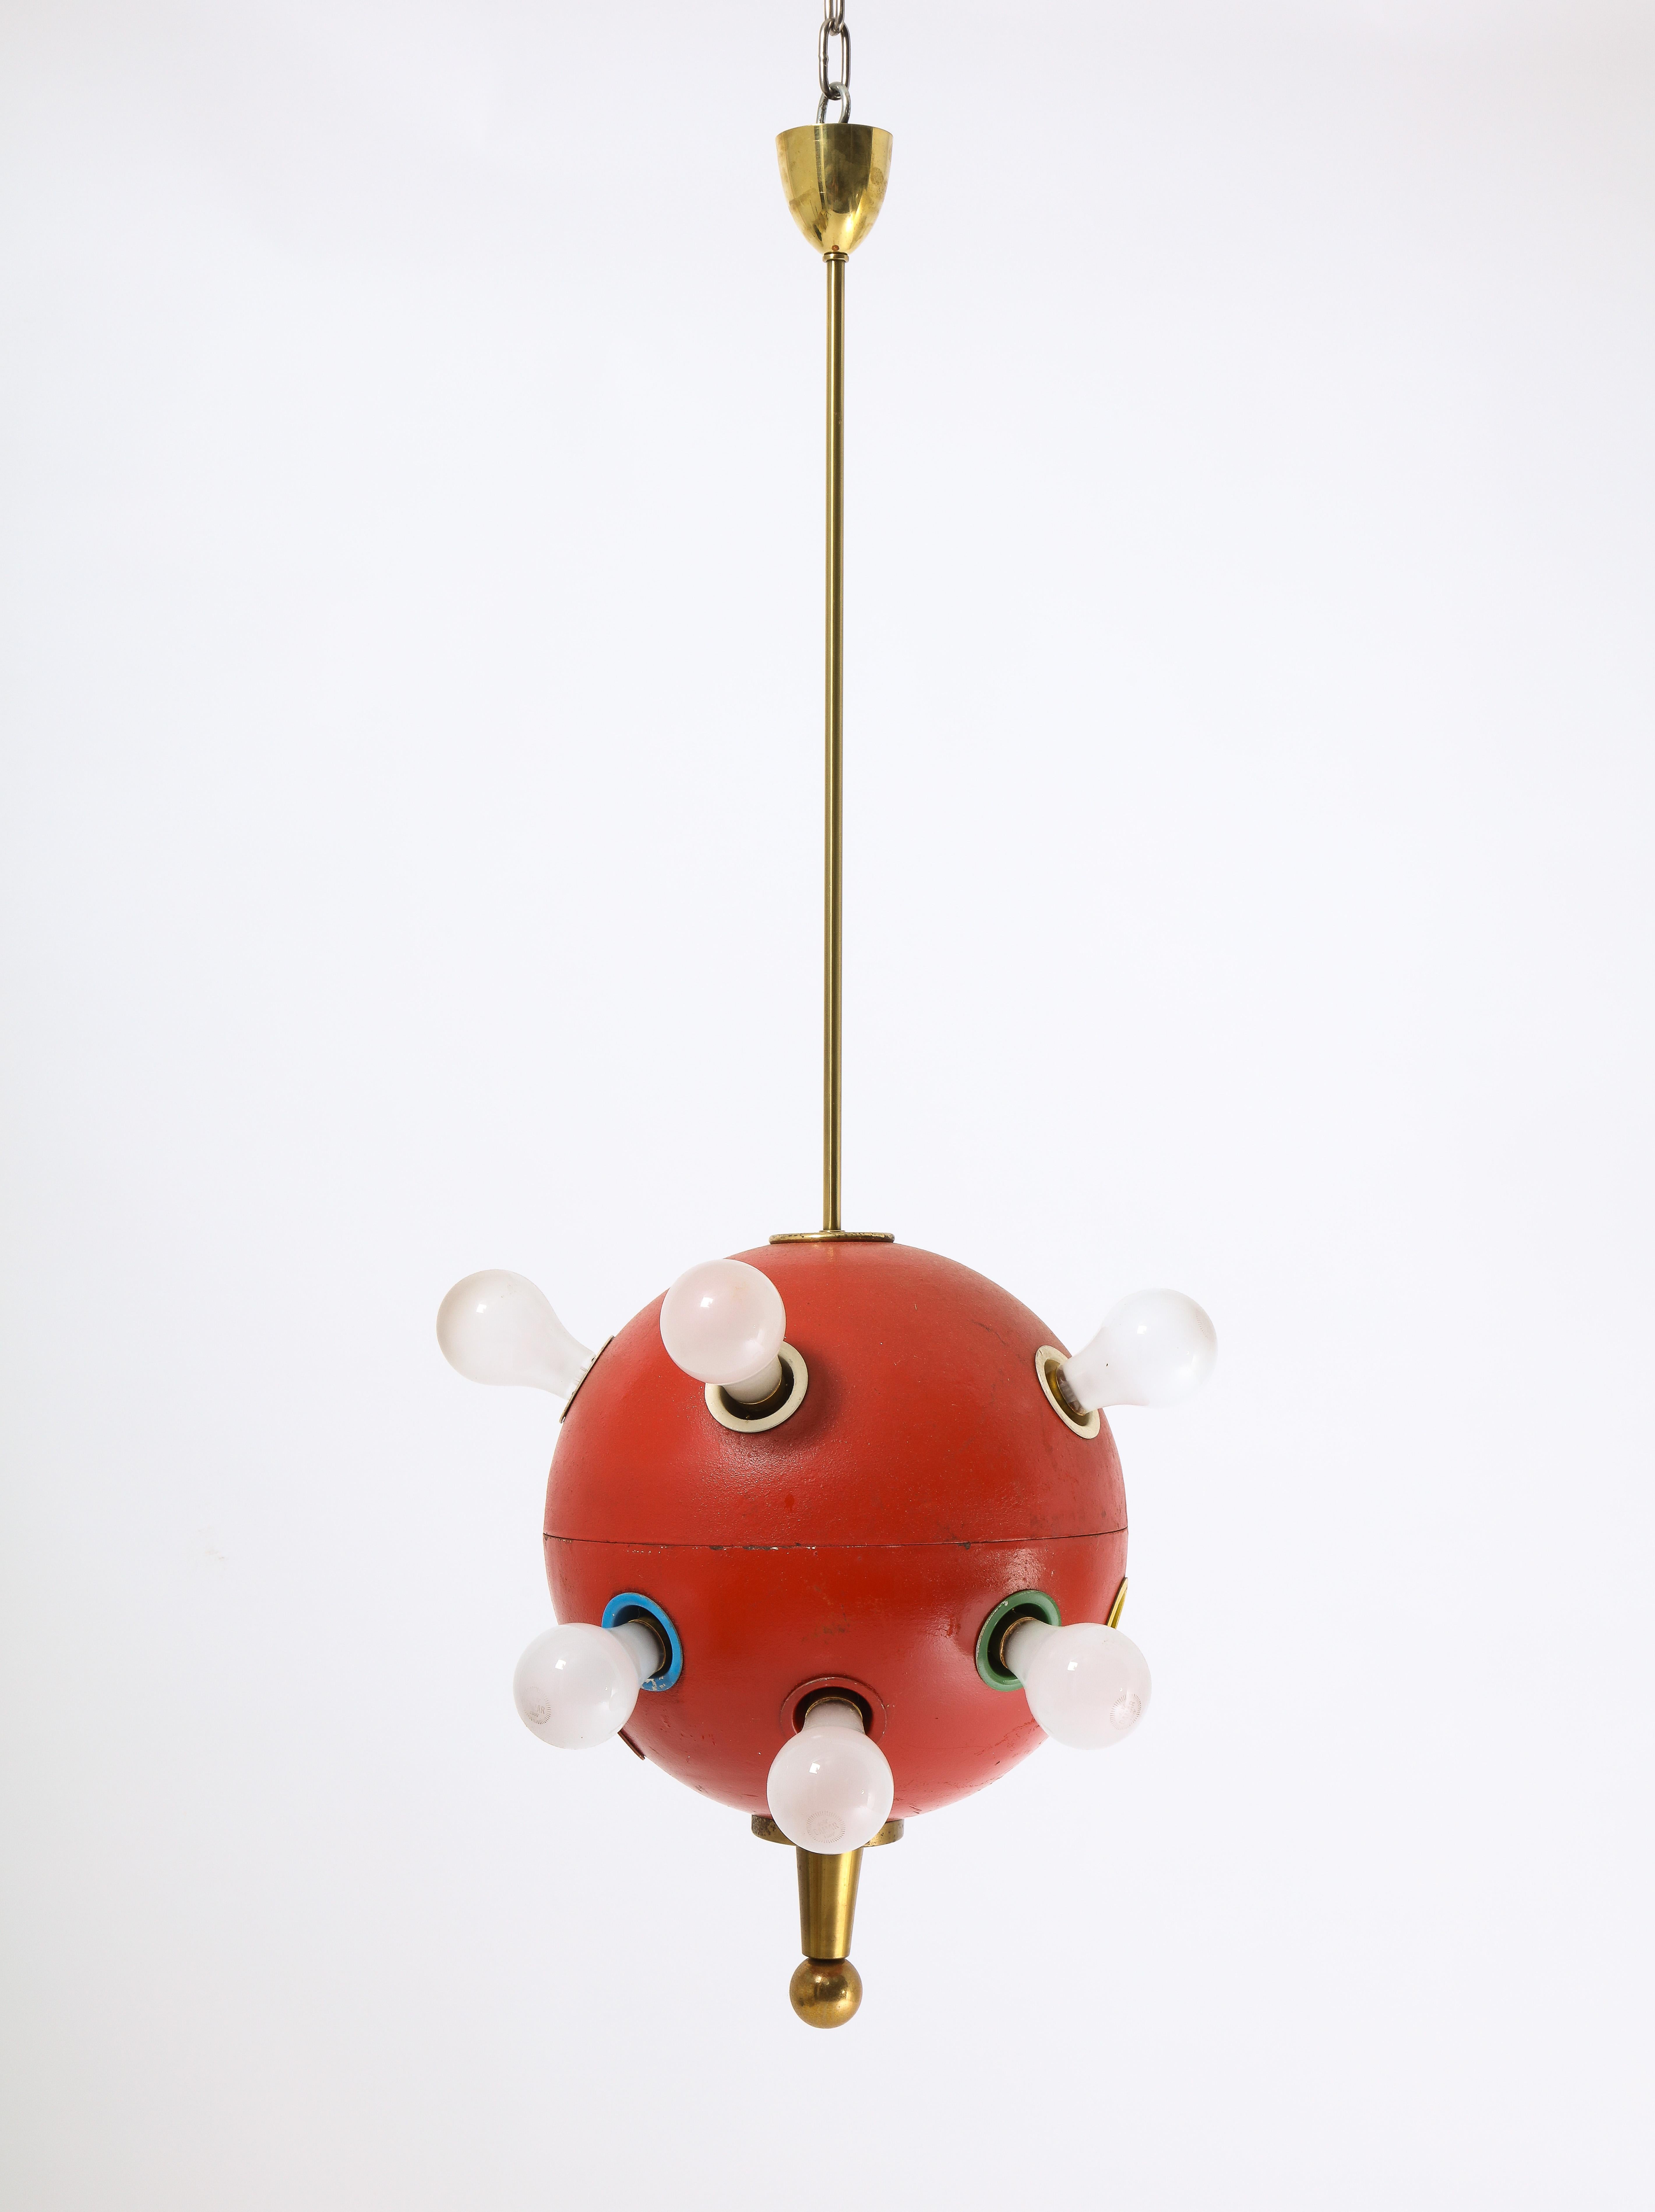 Rare 12 lights 551 spherical pendant by Oscar Torlasco in original red enamel with primary-colored inserts.

Price includes rewiring.